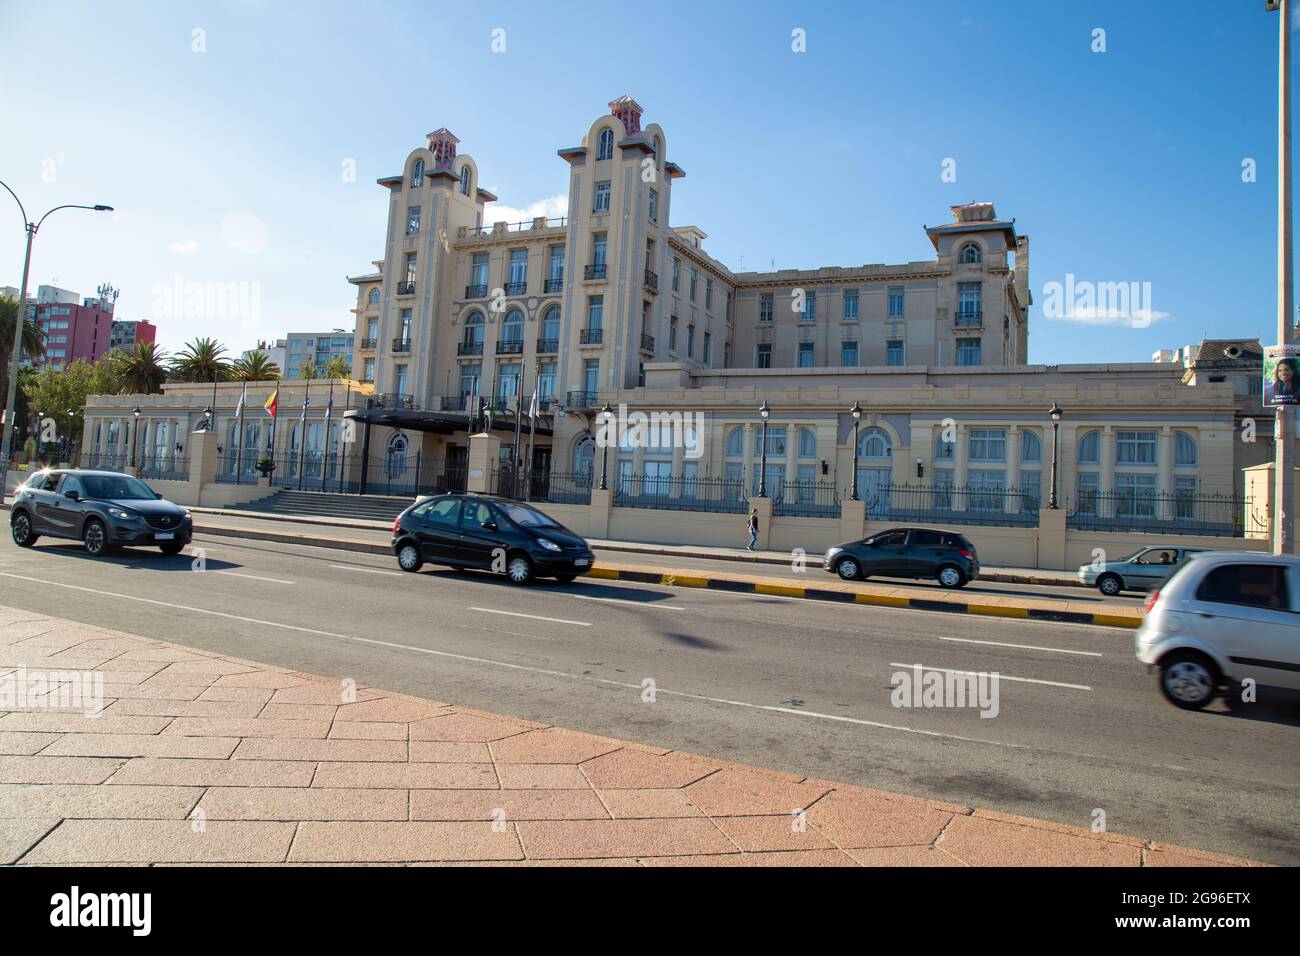 View of Mercosur Building or Palacio del Mercosur. Montevideo, Uruguay. Location functions as Mercosur's administrative headquarters and the Mercosur Stock Photo